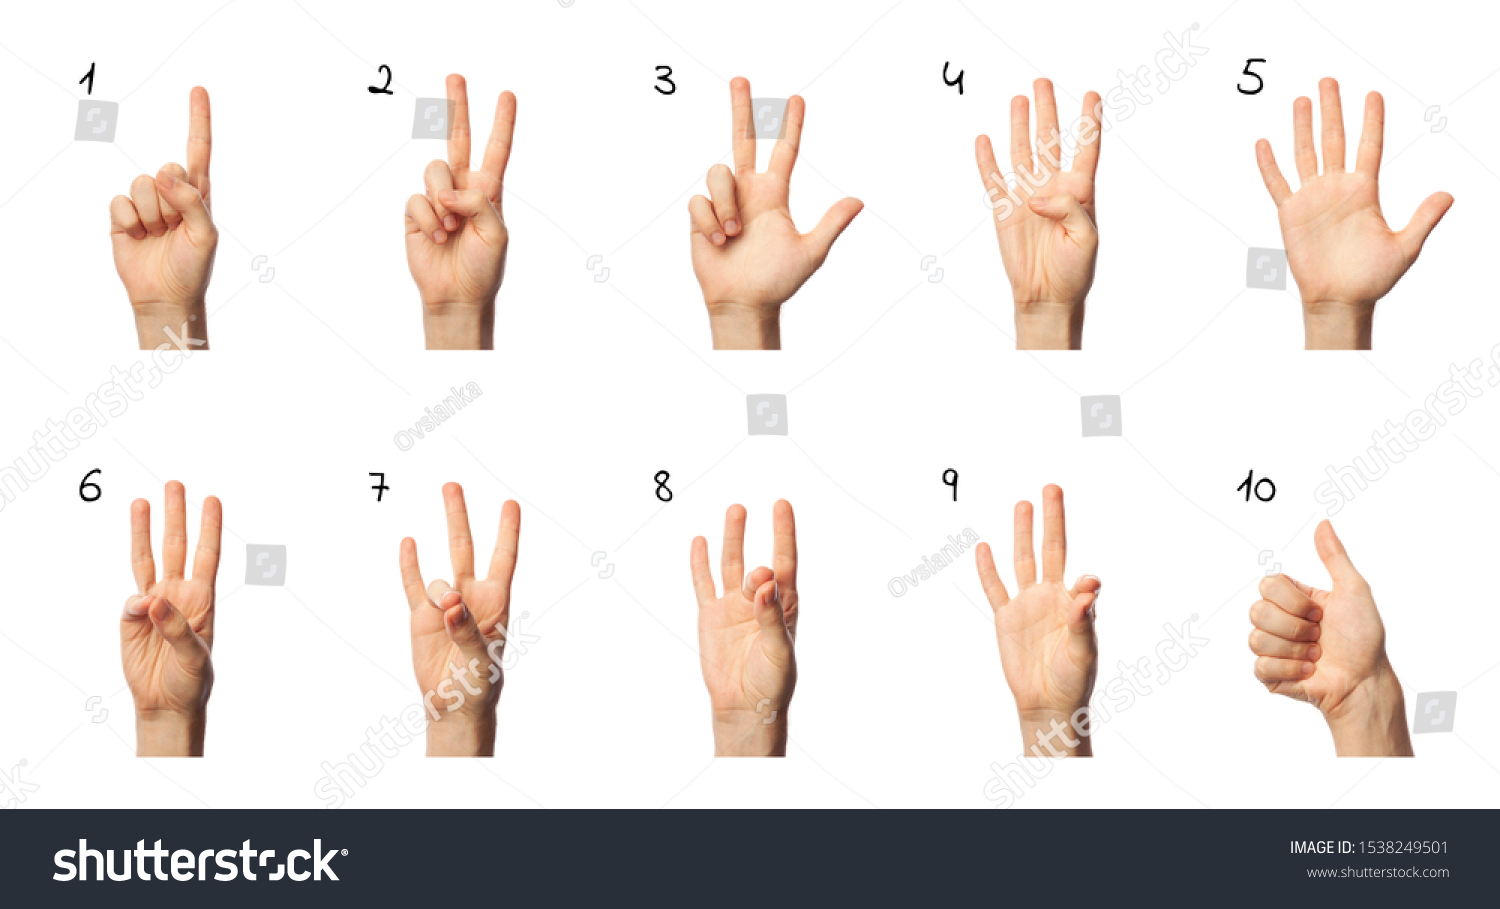 Finger spelling numbers from 1 to 10 in American Sign Language on white background. ASL concept #1538249501